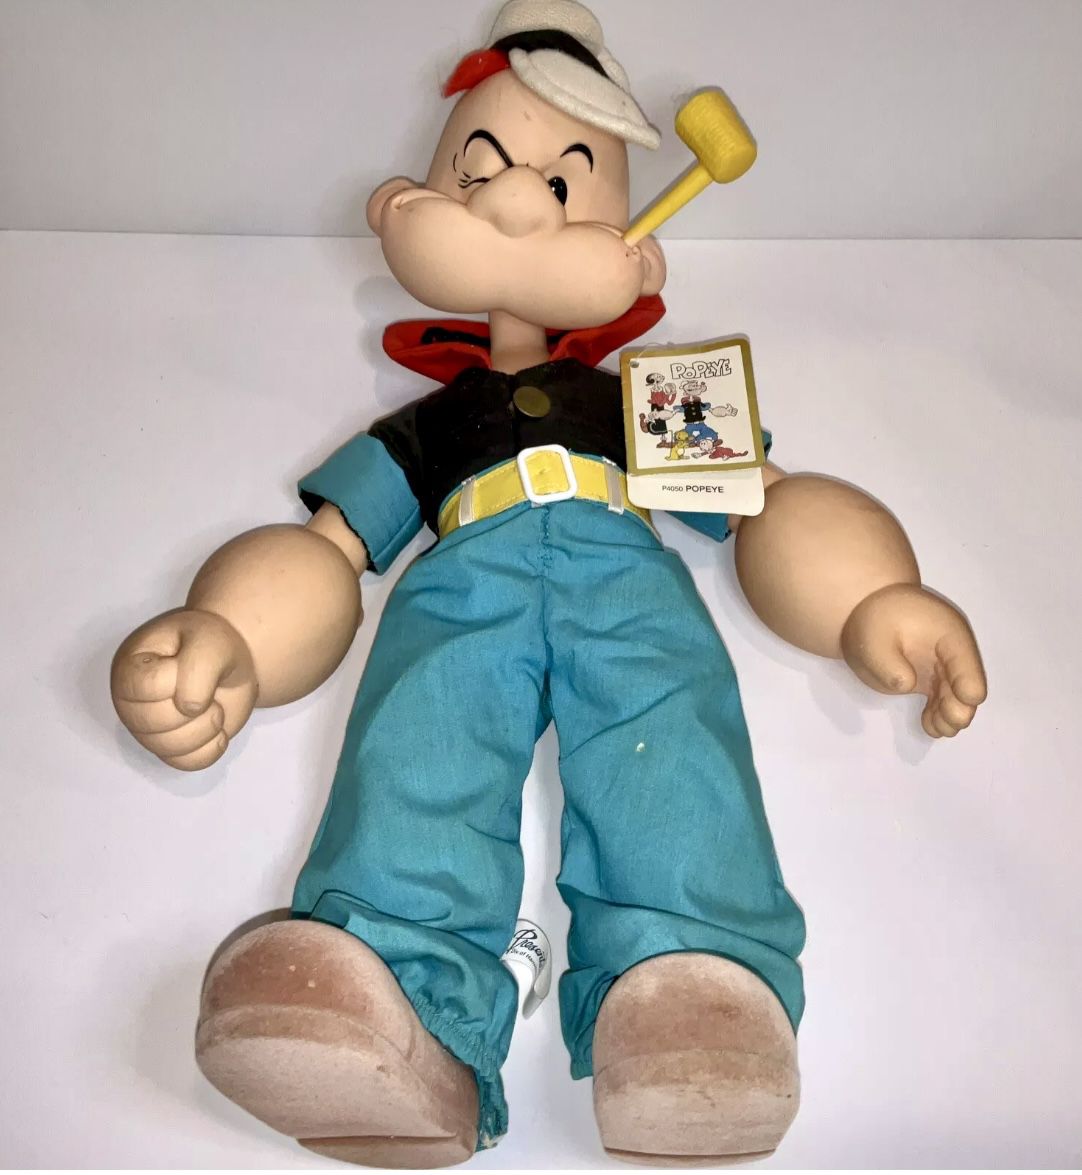 Popeye The Sailor Man 1985 Plush Doll By Presents Tags Stand 16”